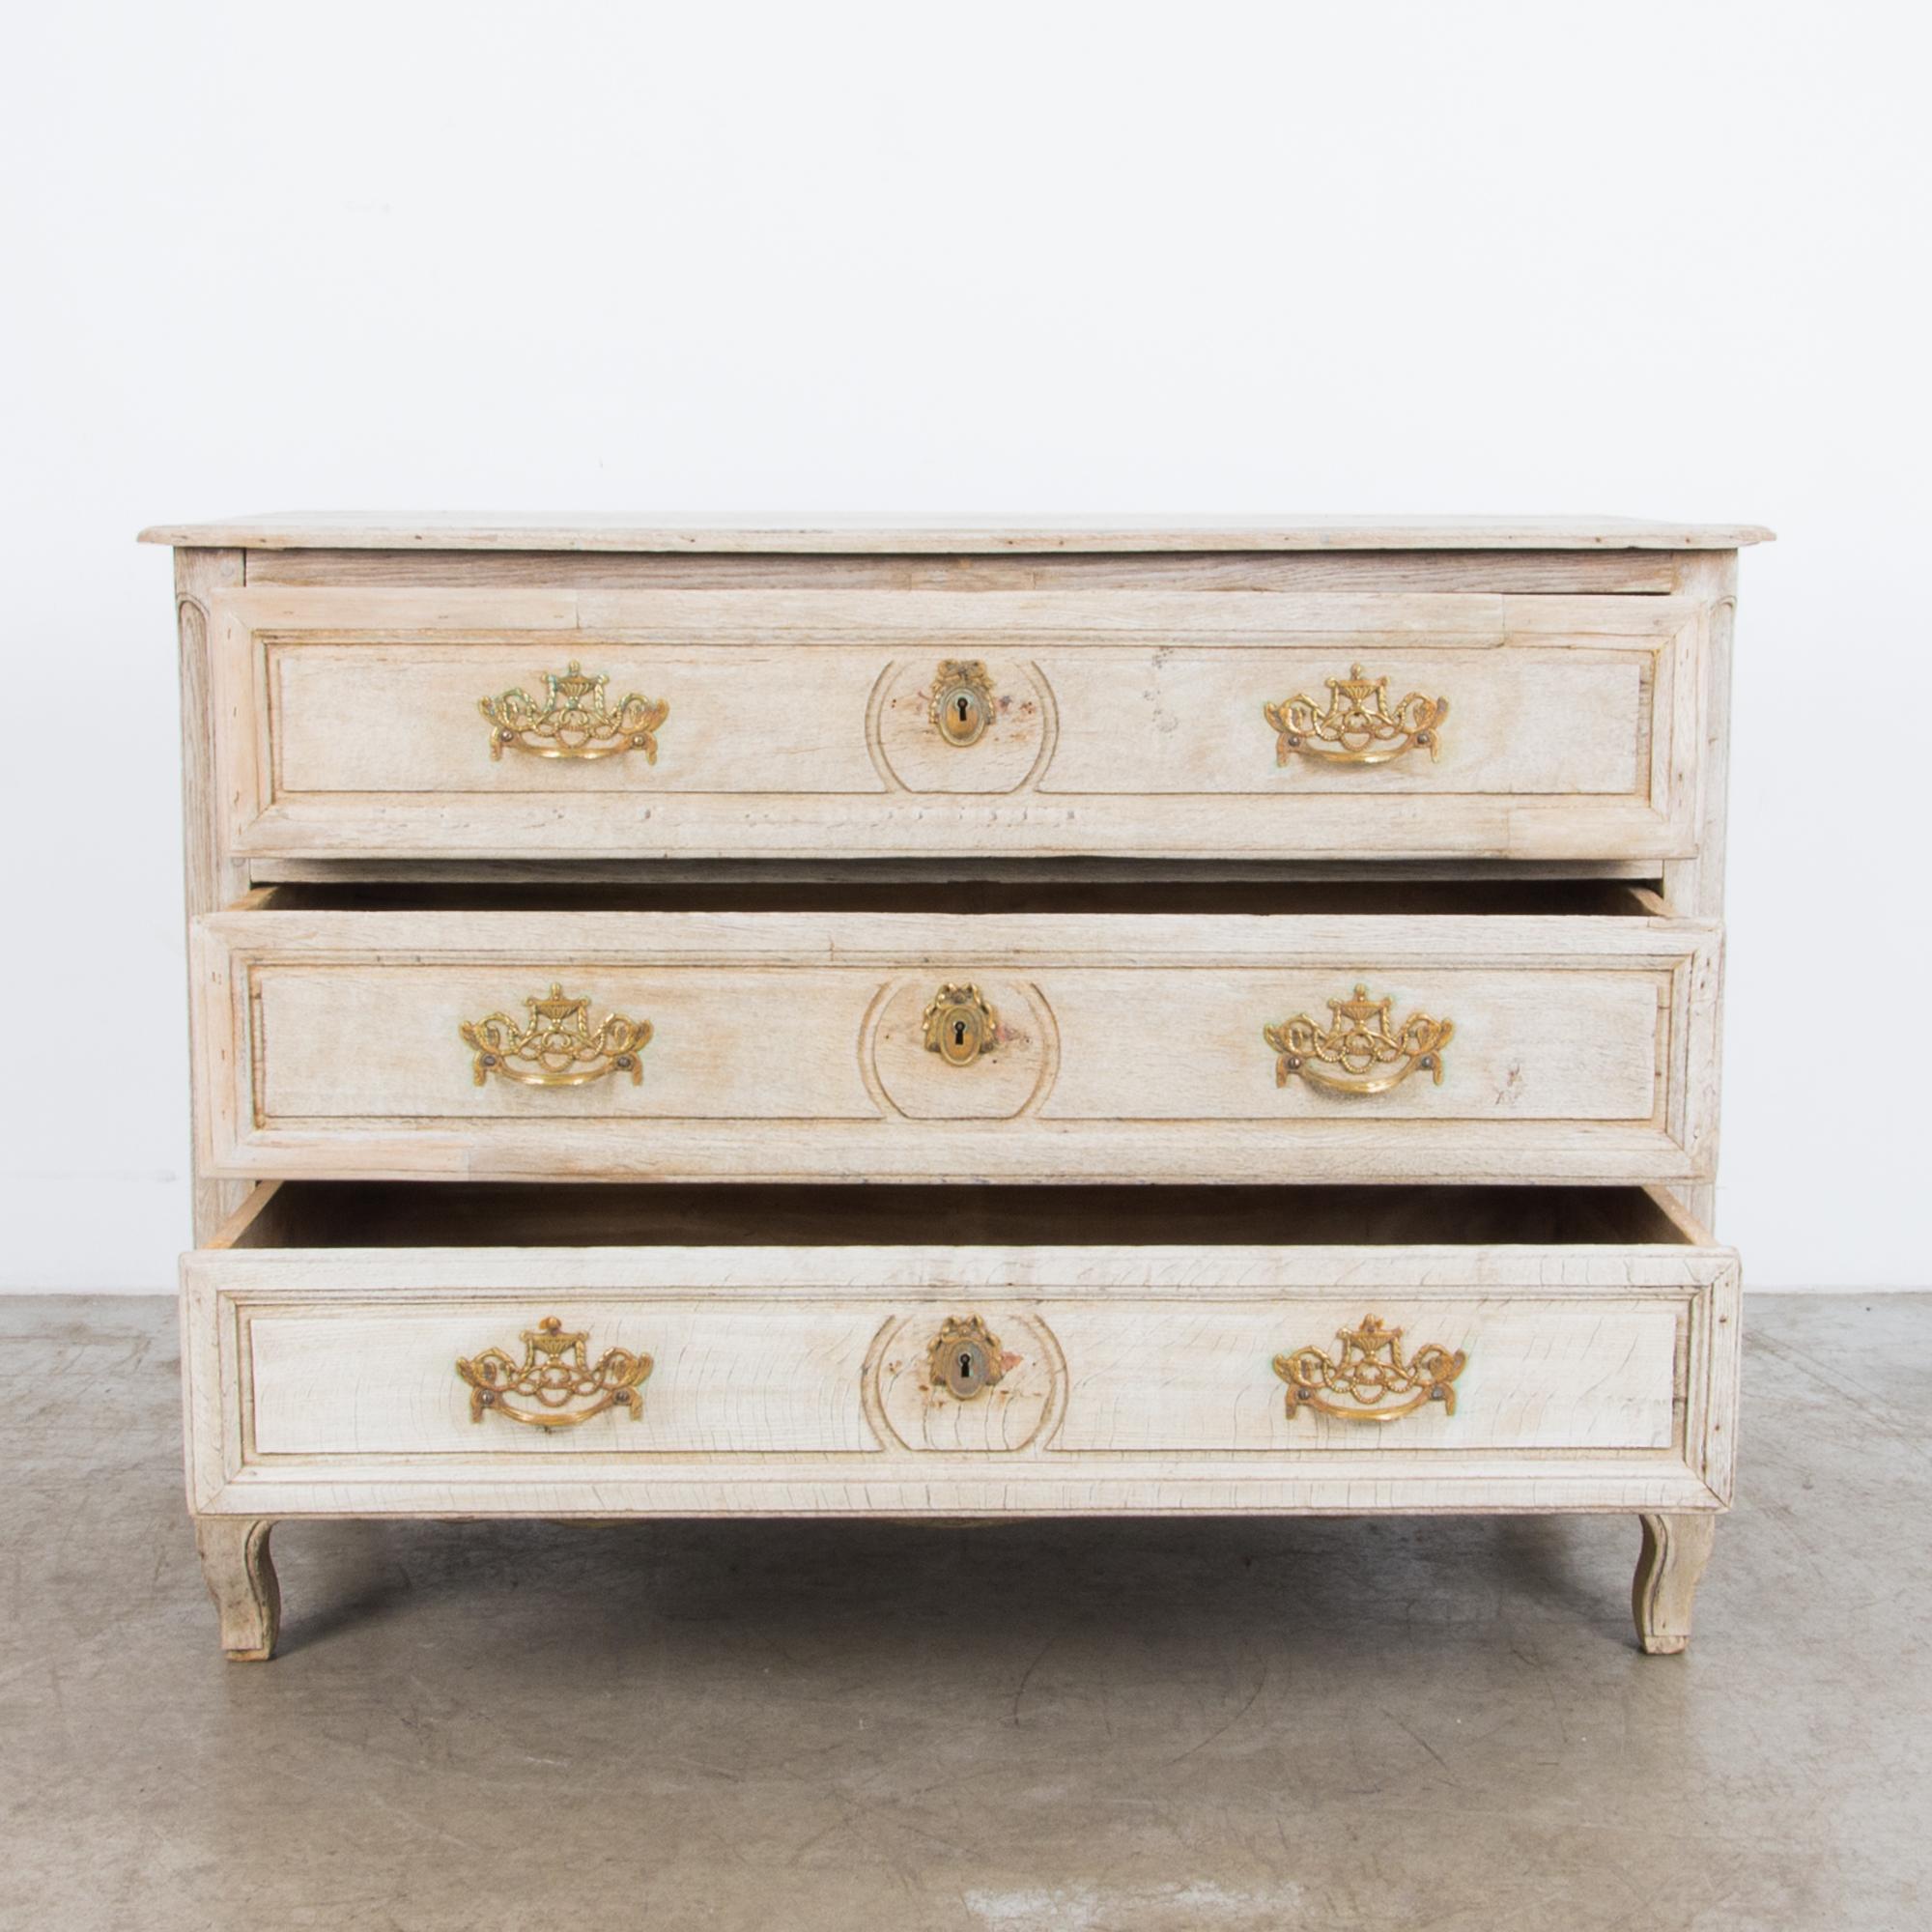 French Provincial Late 19th Century Oak Chest of Drawers